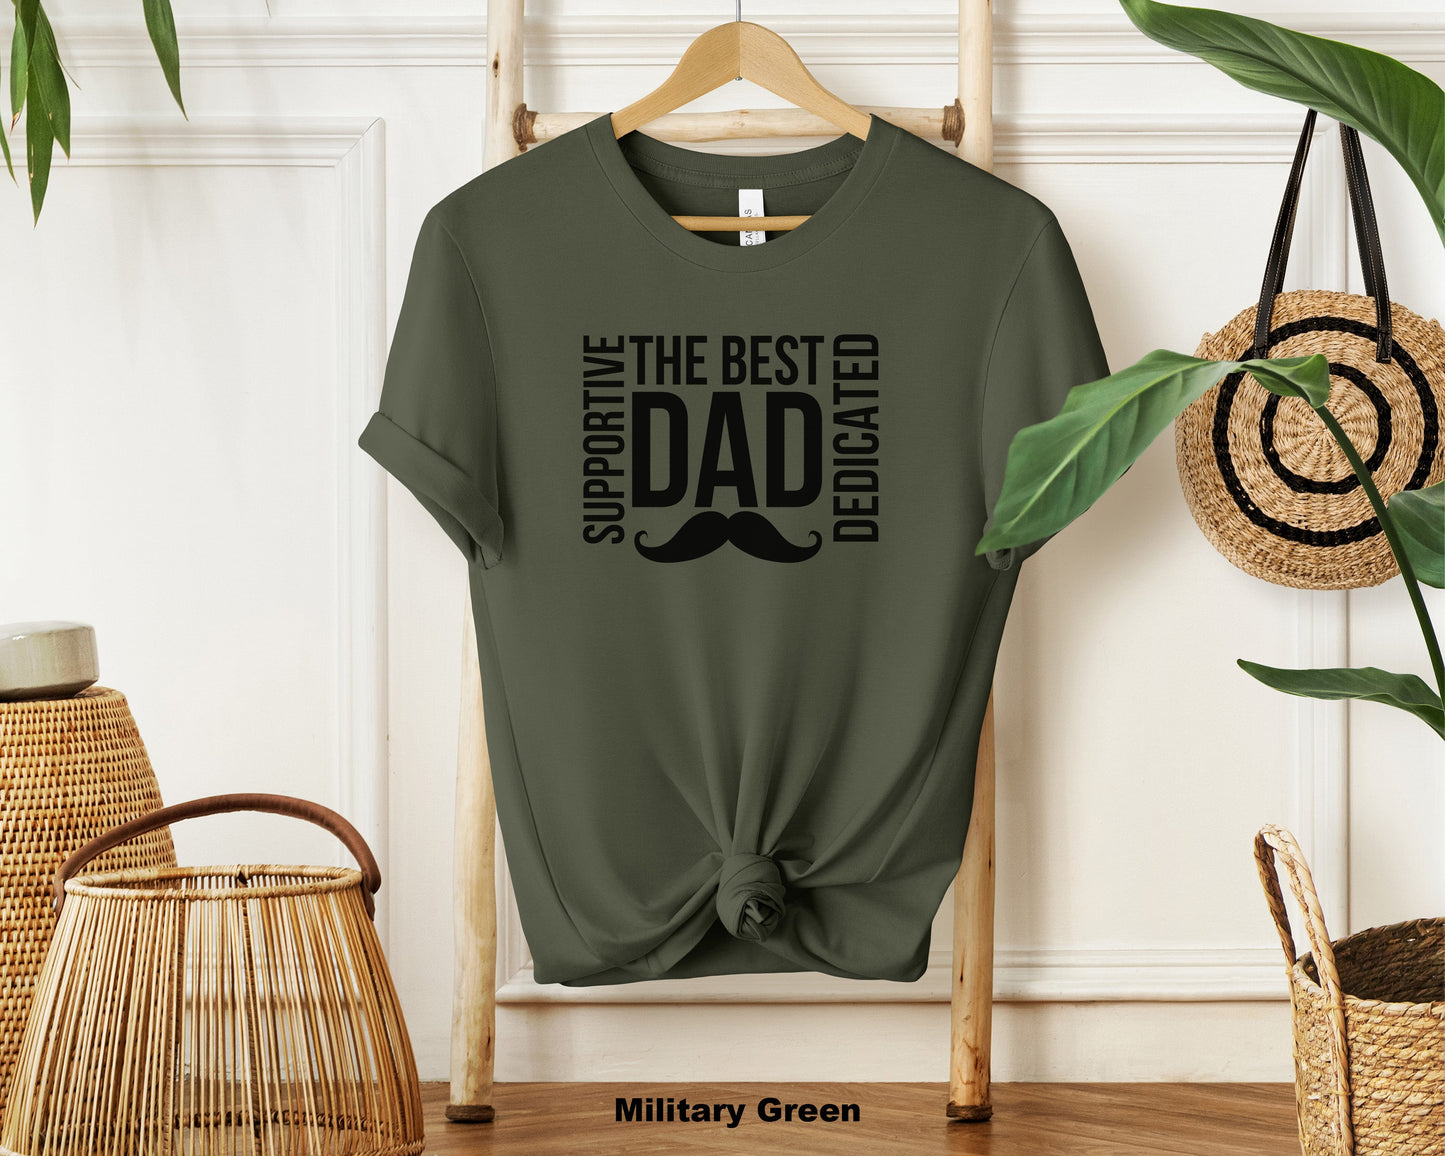 "Super Dad Classic Unisex Short Sleeve Crewneck T-Shirt in Soft Cotton Material with Quality Print"